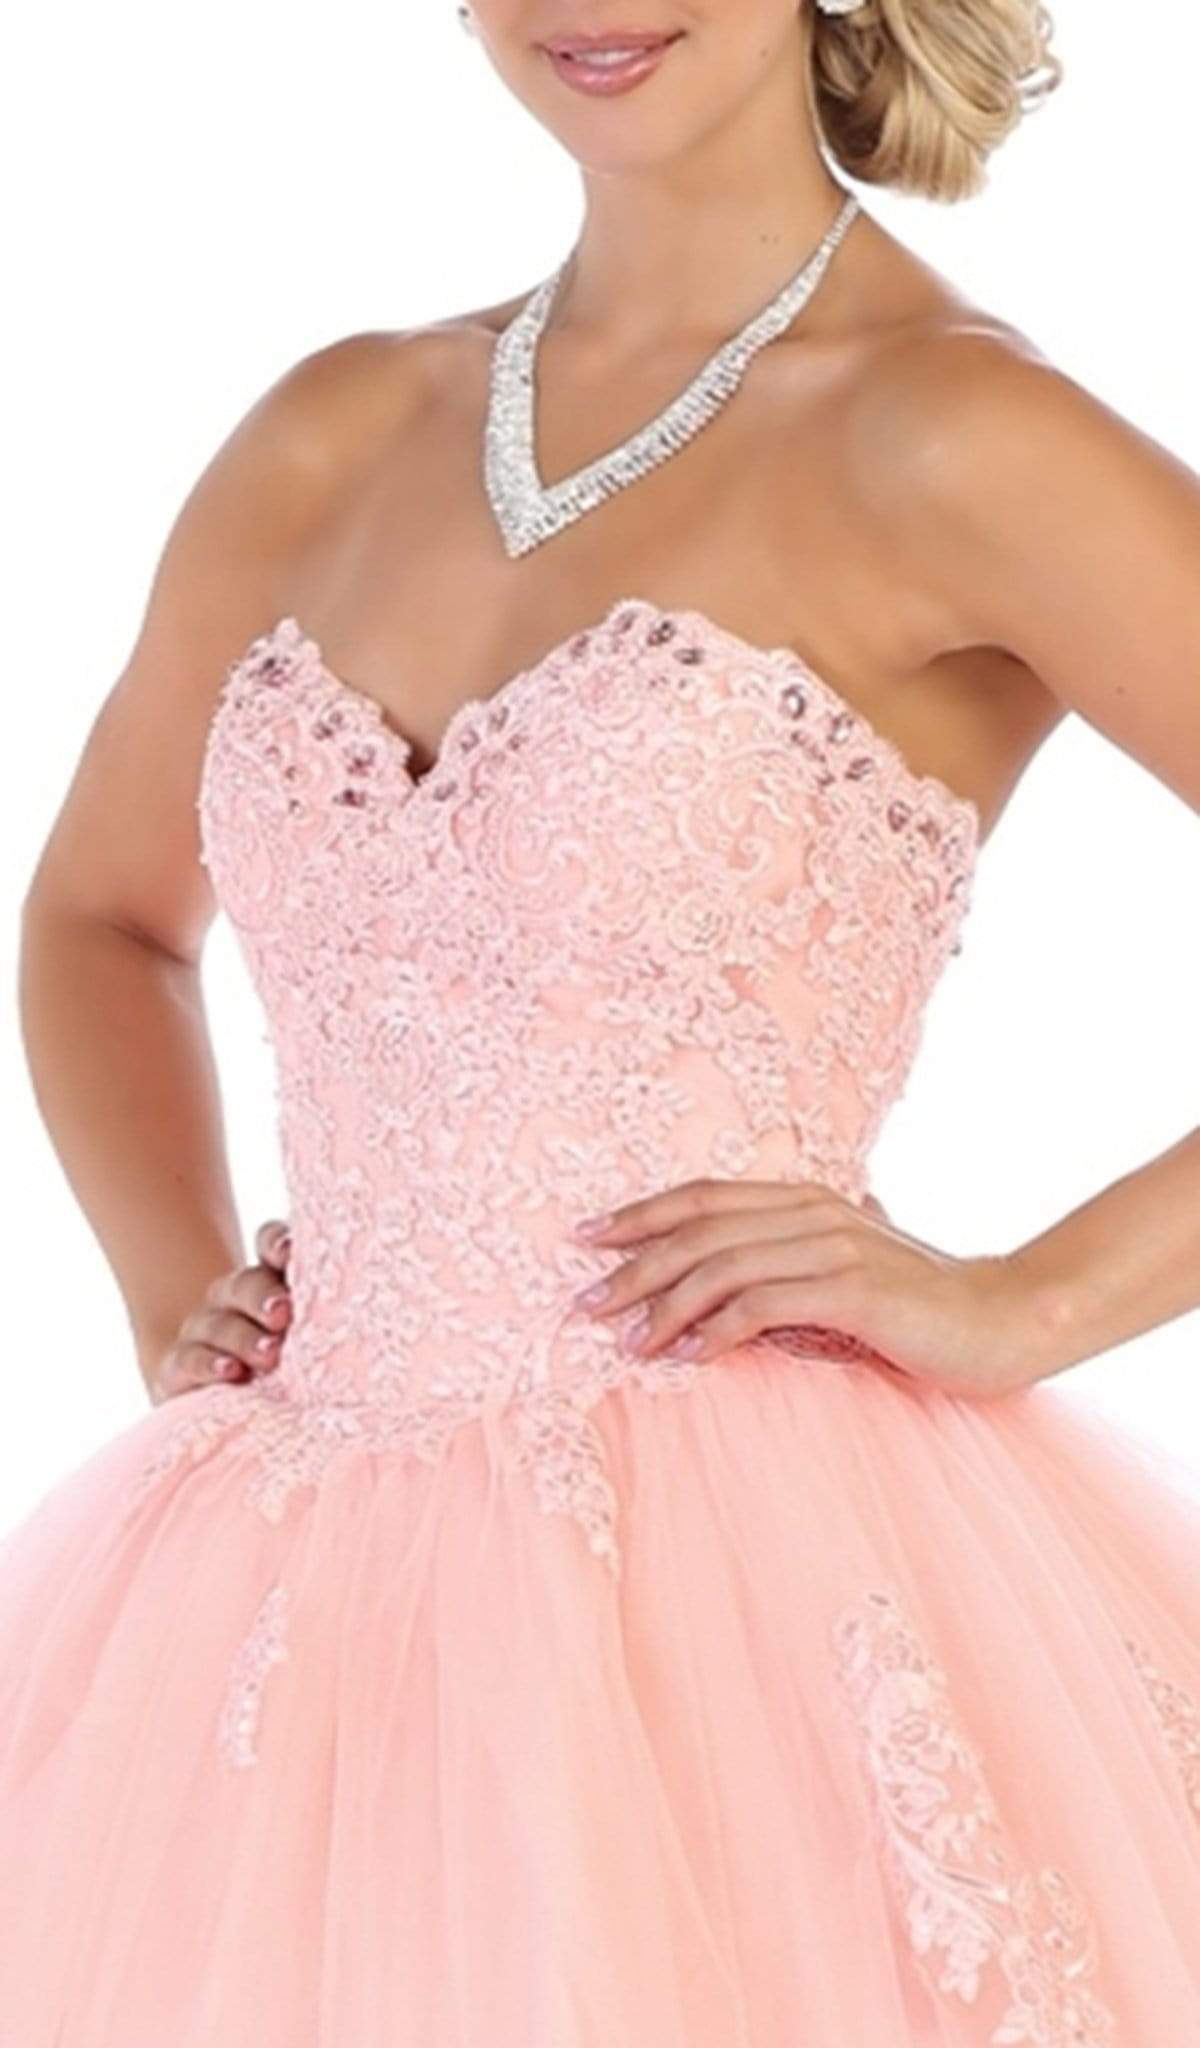 May Queen - LK107 Strapless Scalloped Corset Appliqued Ballgown Special Occasion Dress